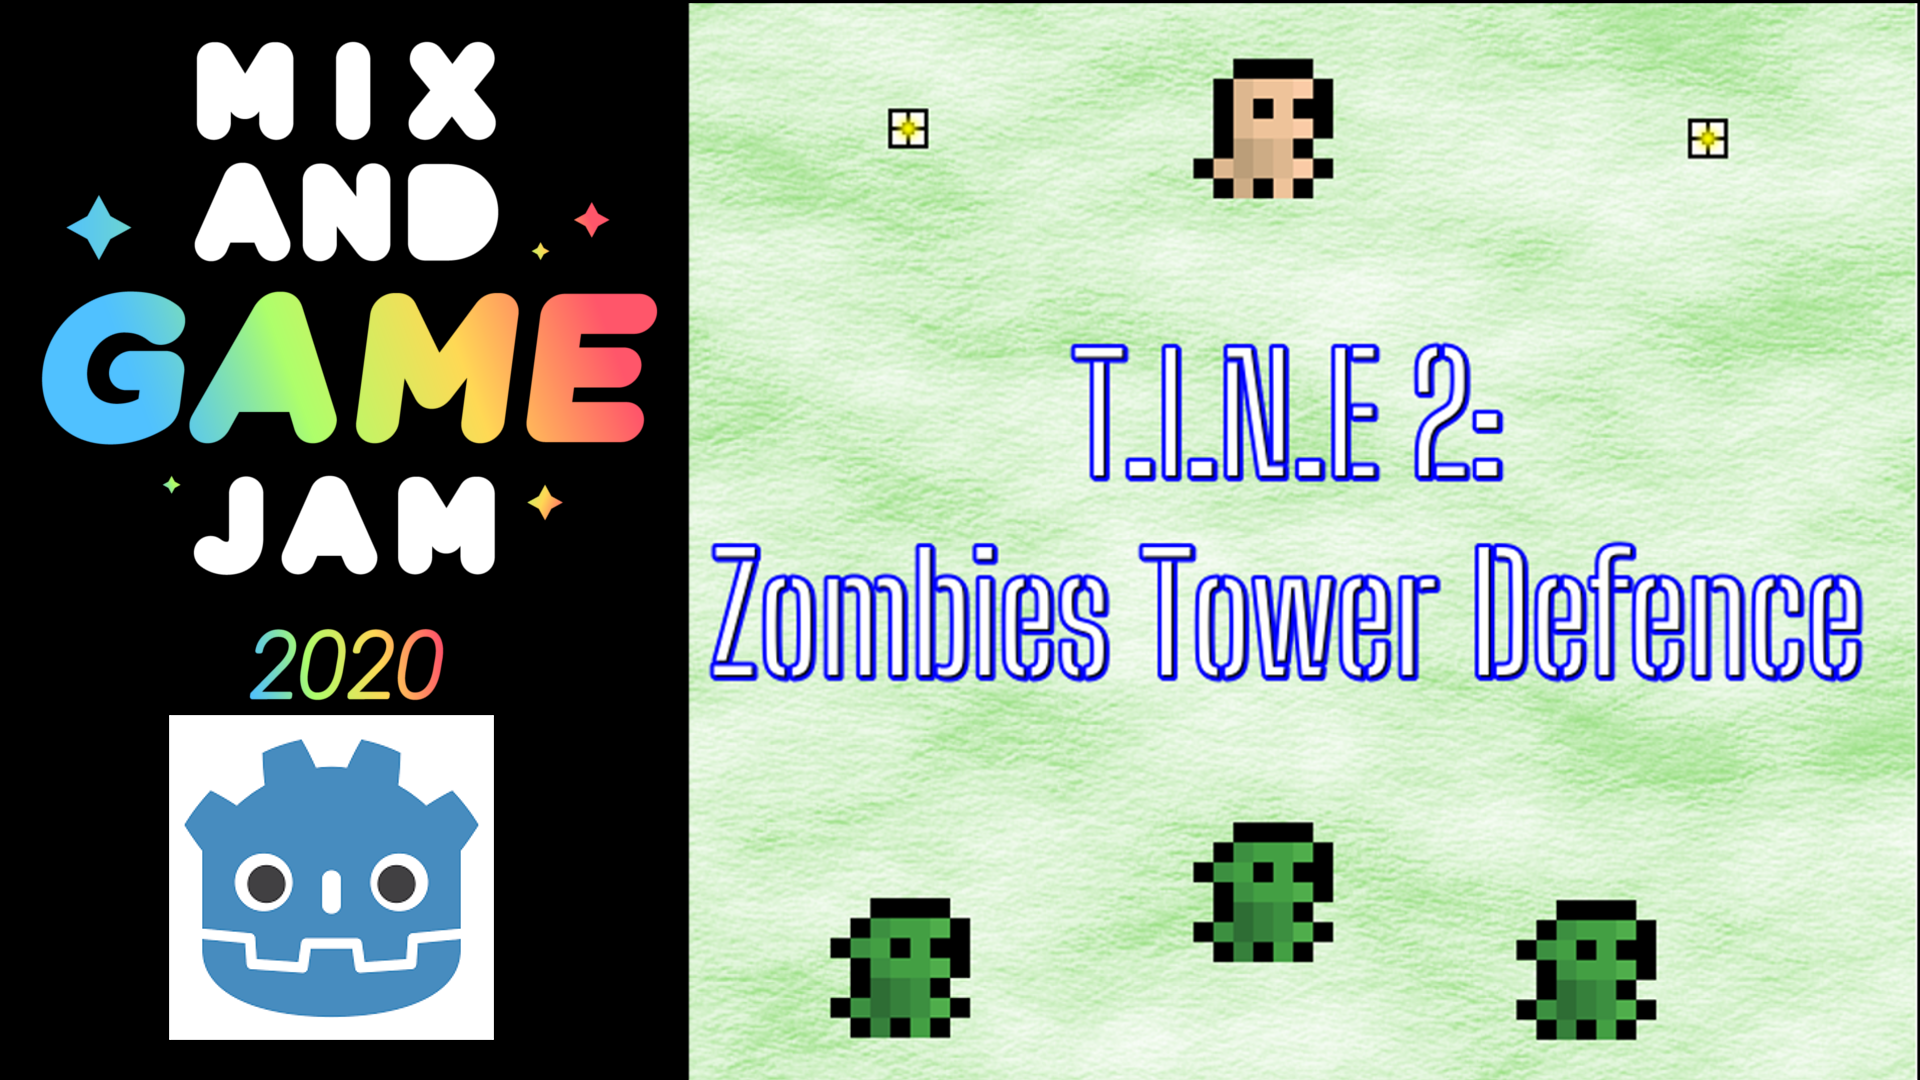 T.I.N.E 2: Zombies Tower Defence